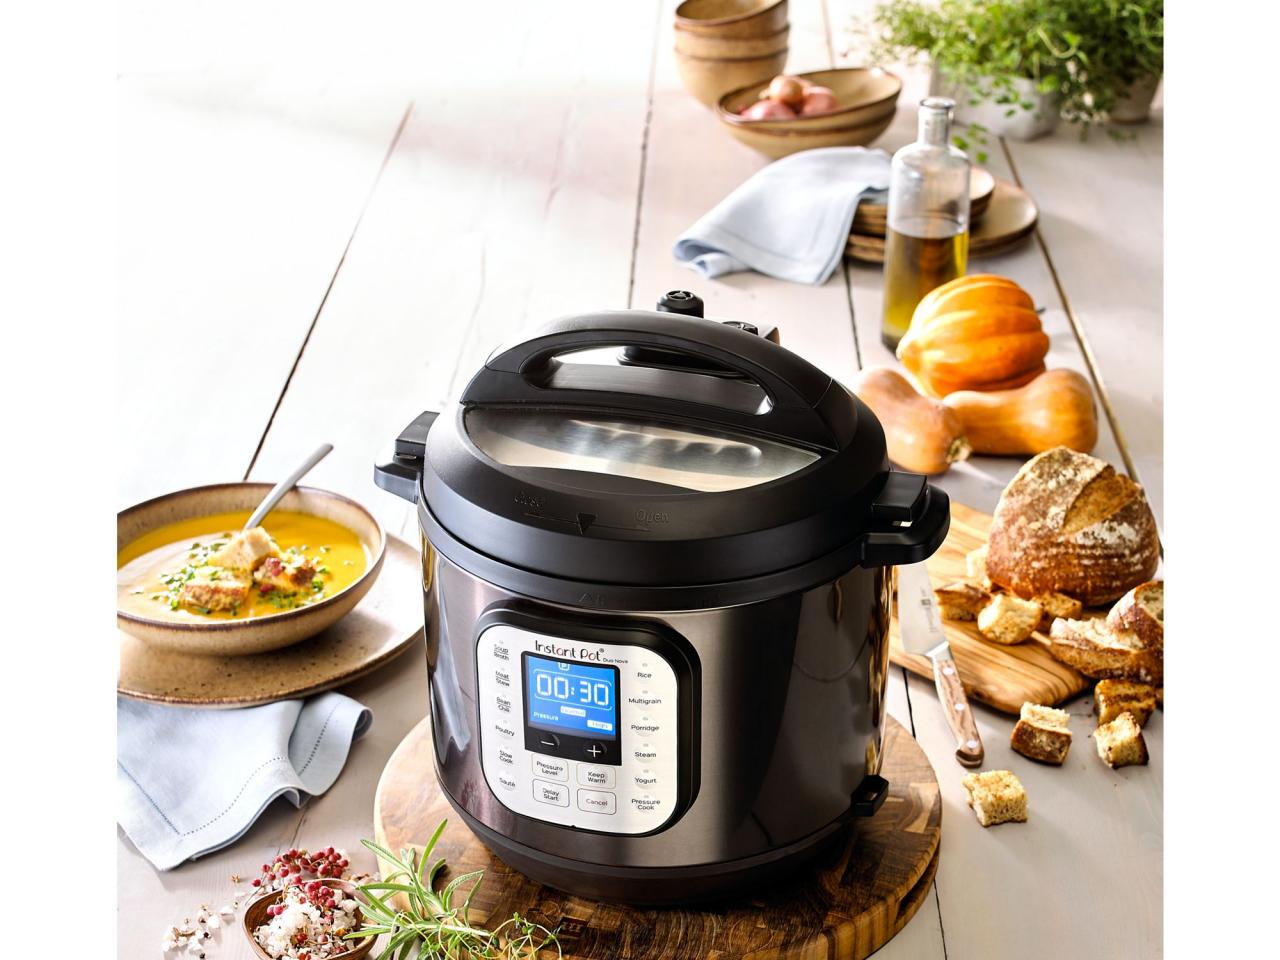 https://food.fnr.sndimg.com/content/dam/images/food/products/2020/3/30/rx_instant-pot-duo-nova-6-quart-7-in-1-one-touch-multi-cooker.jpeg.rend.hgtvcom.1280.960.suffix/1585585928066.jpeg